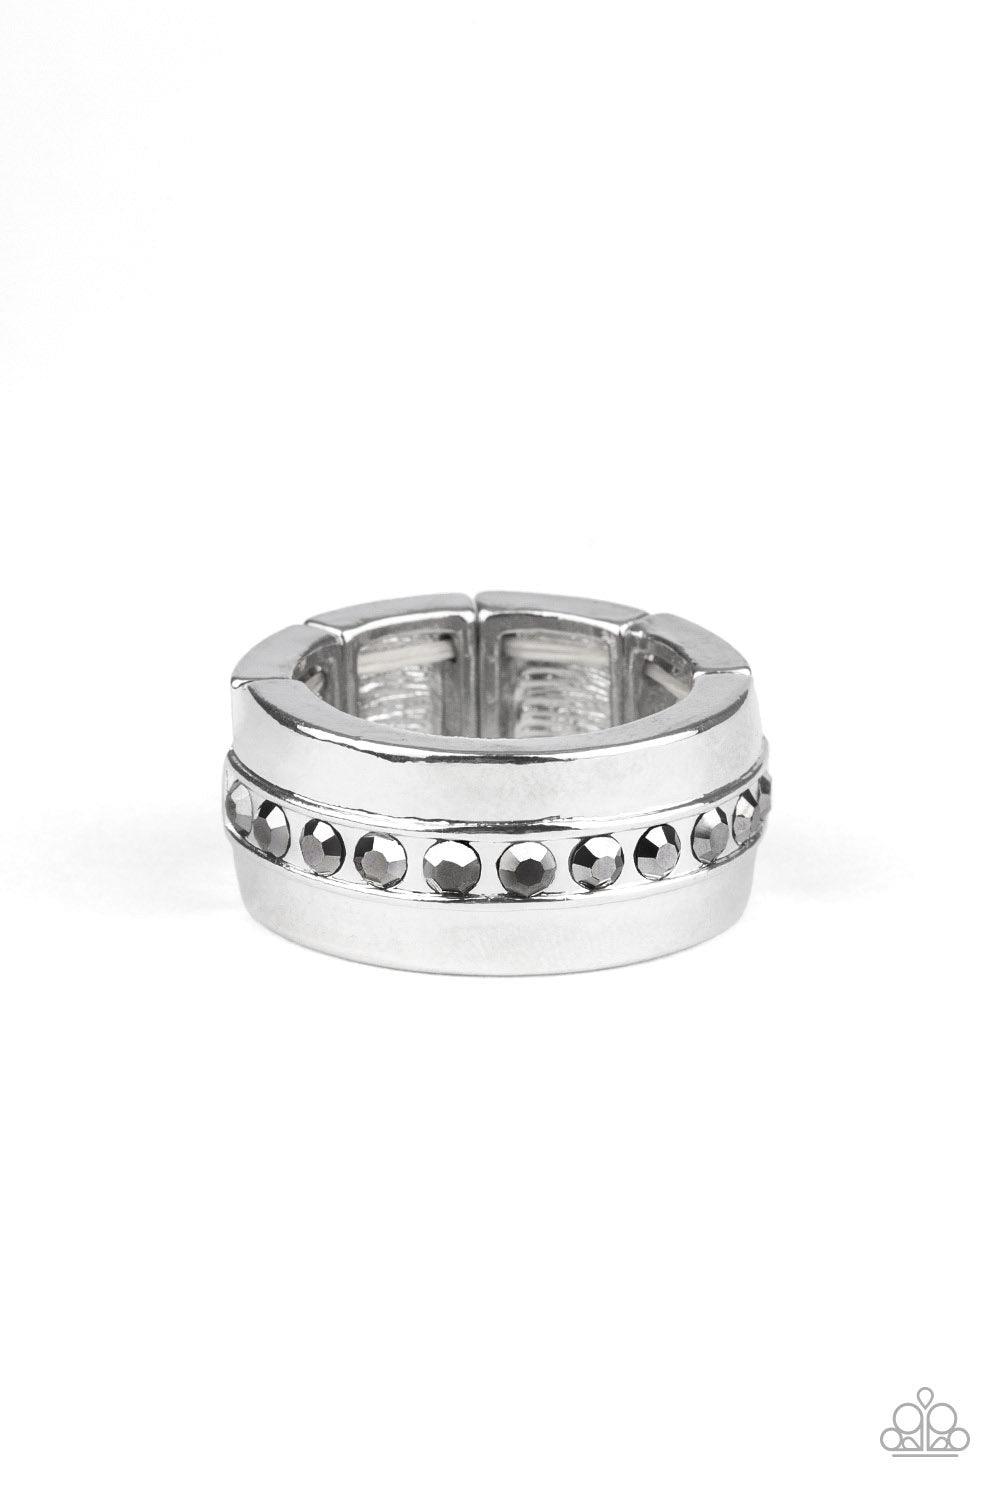 Paparazzi Accessories Reigning Champ - Silver A single row of glassy hematite rhinestones is encrusted along the center of a thick silver band. Features a stretchy band for a flexible fit. Jewelry